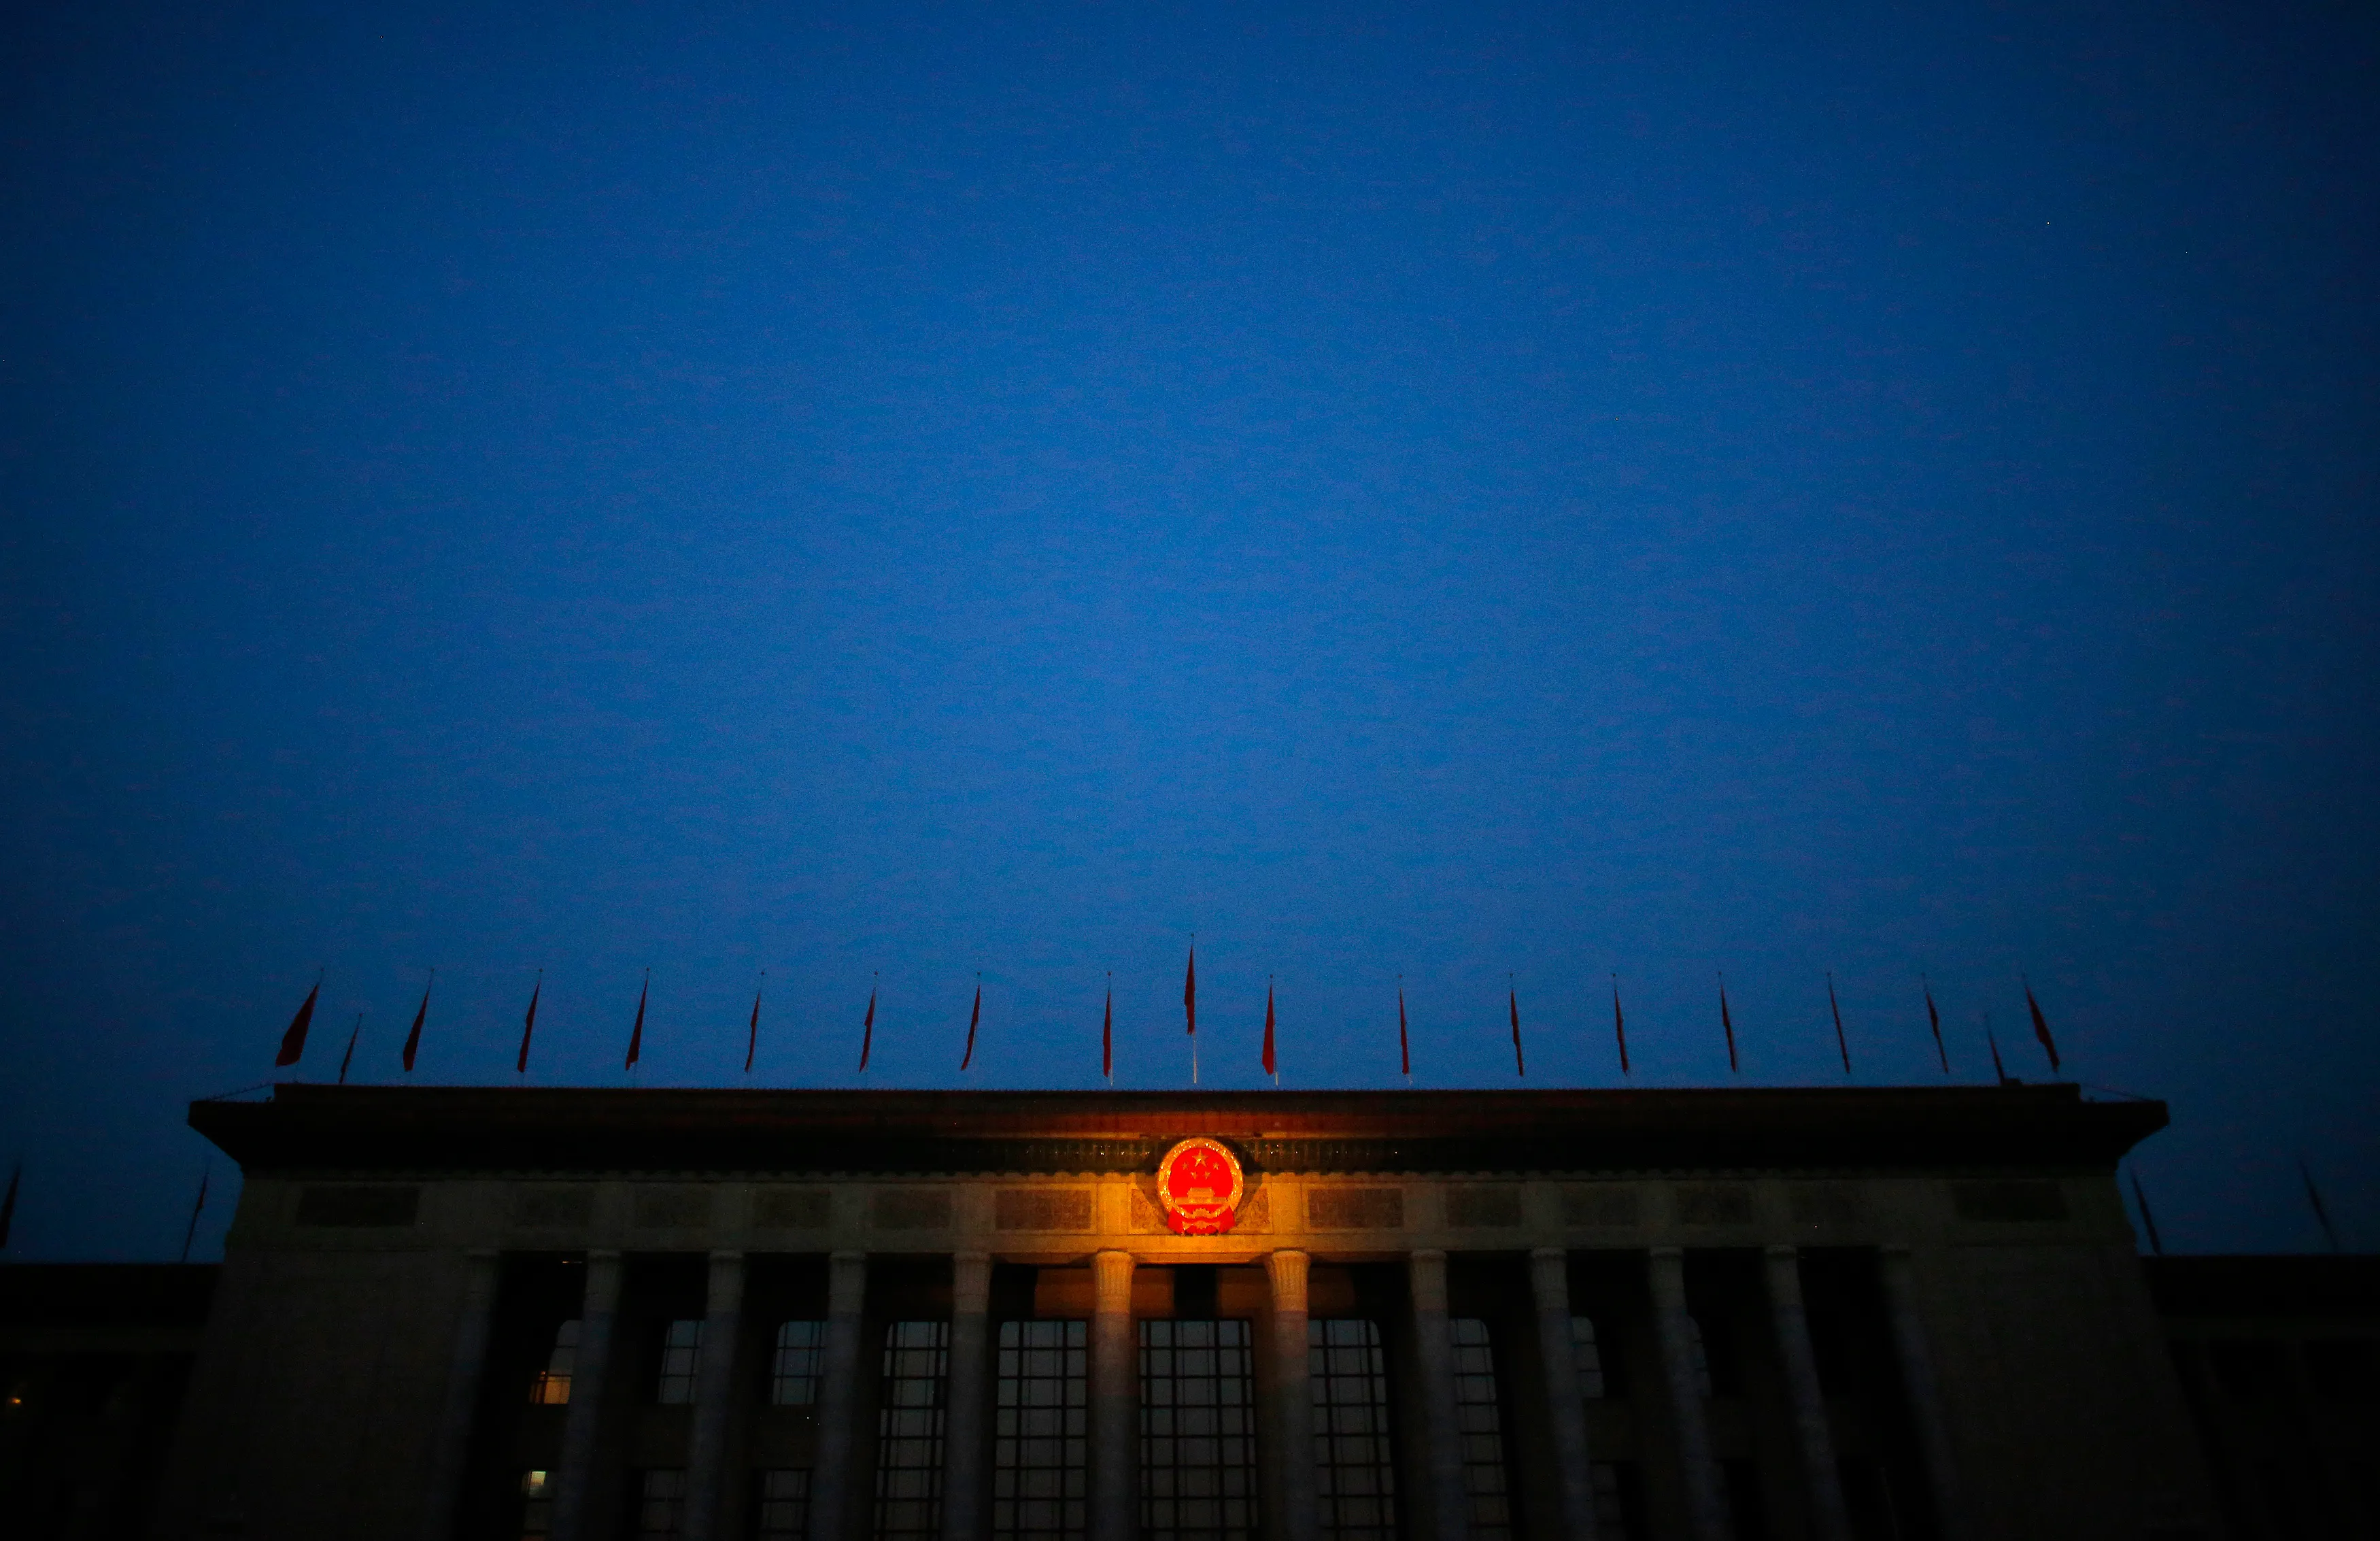 The Great Hall of the People, where the National People's Congress will be held is seen in Beijing, March 5, 2015. Around 3,000 delegates to the annual meeting of China's parliament, the National People's Congress, will meet in Beijing's Great Hall of the People on March 5 for a session that normally lasts around 10 days. REUTERS/Carlos Barria (CHINA - Tags: POLITICS TPX IMAGES OF THE DAY) - GM1EB350M8U01